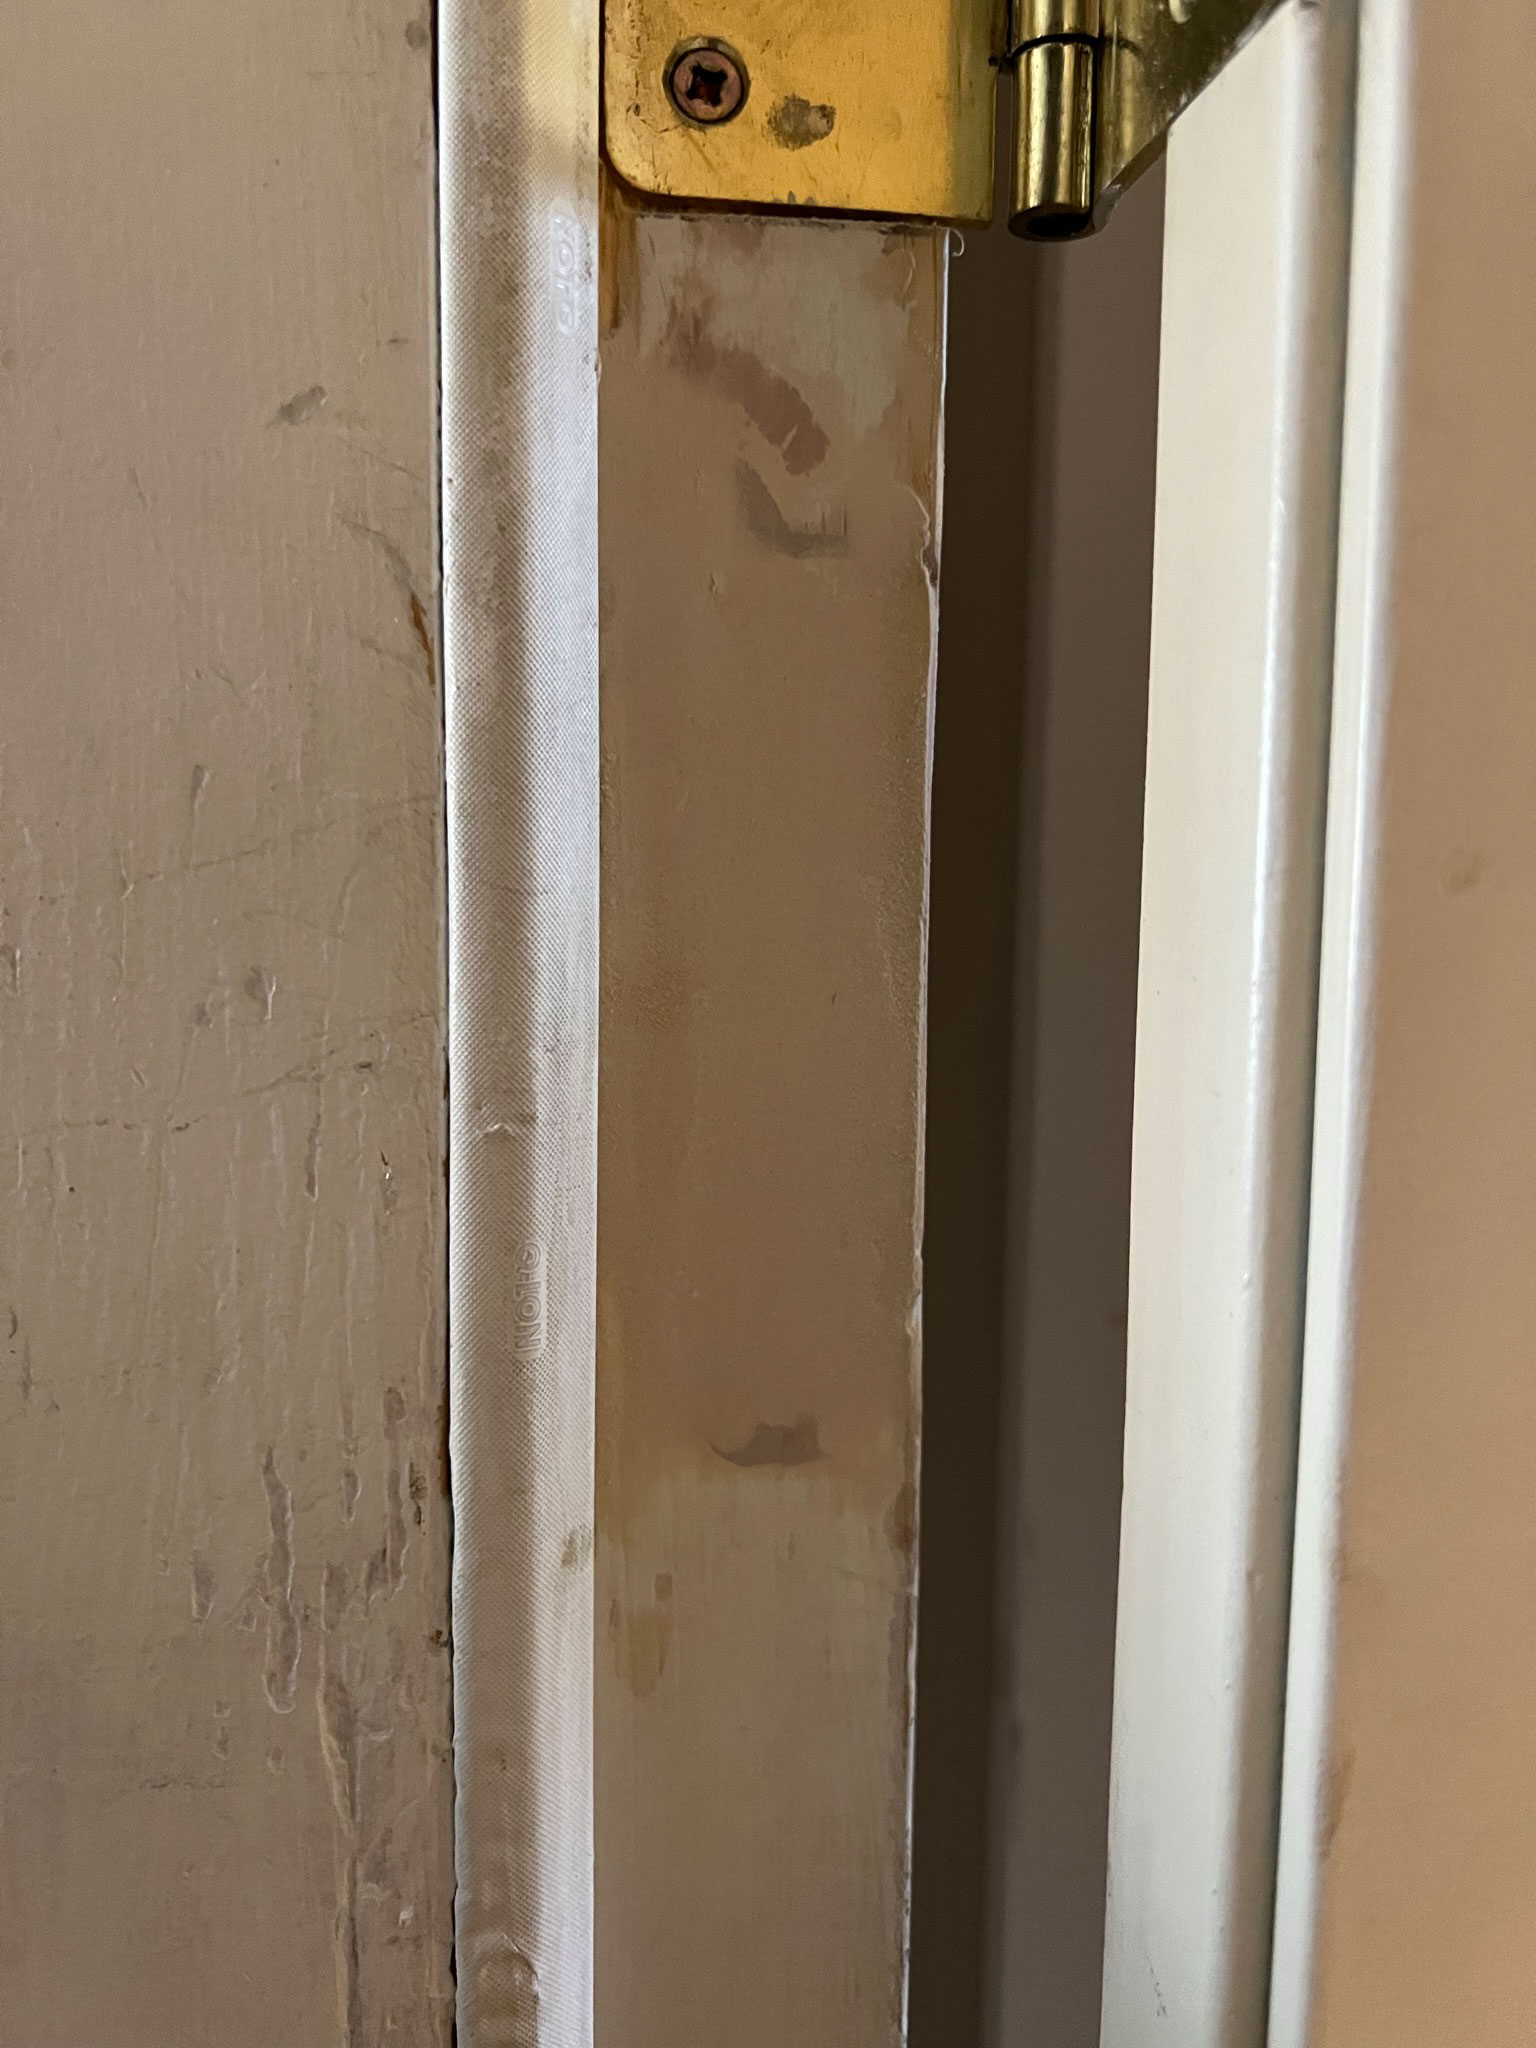 patch on door frame sanded smooth